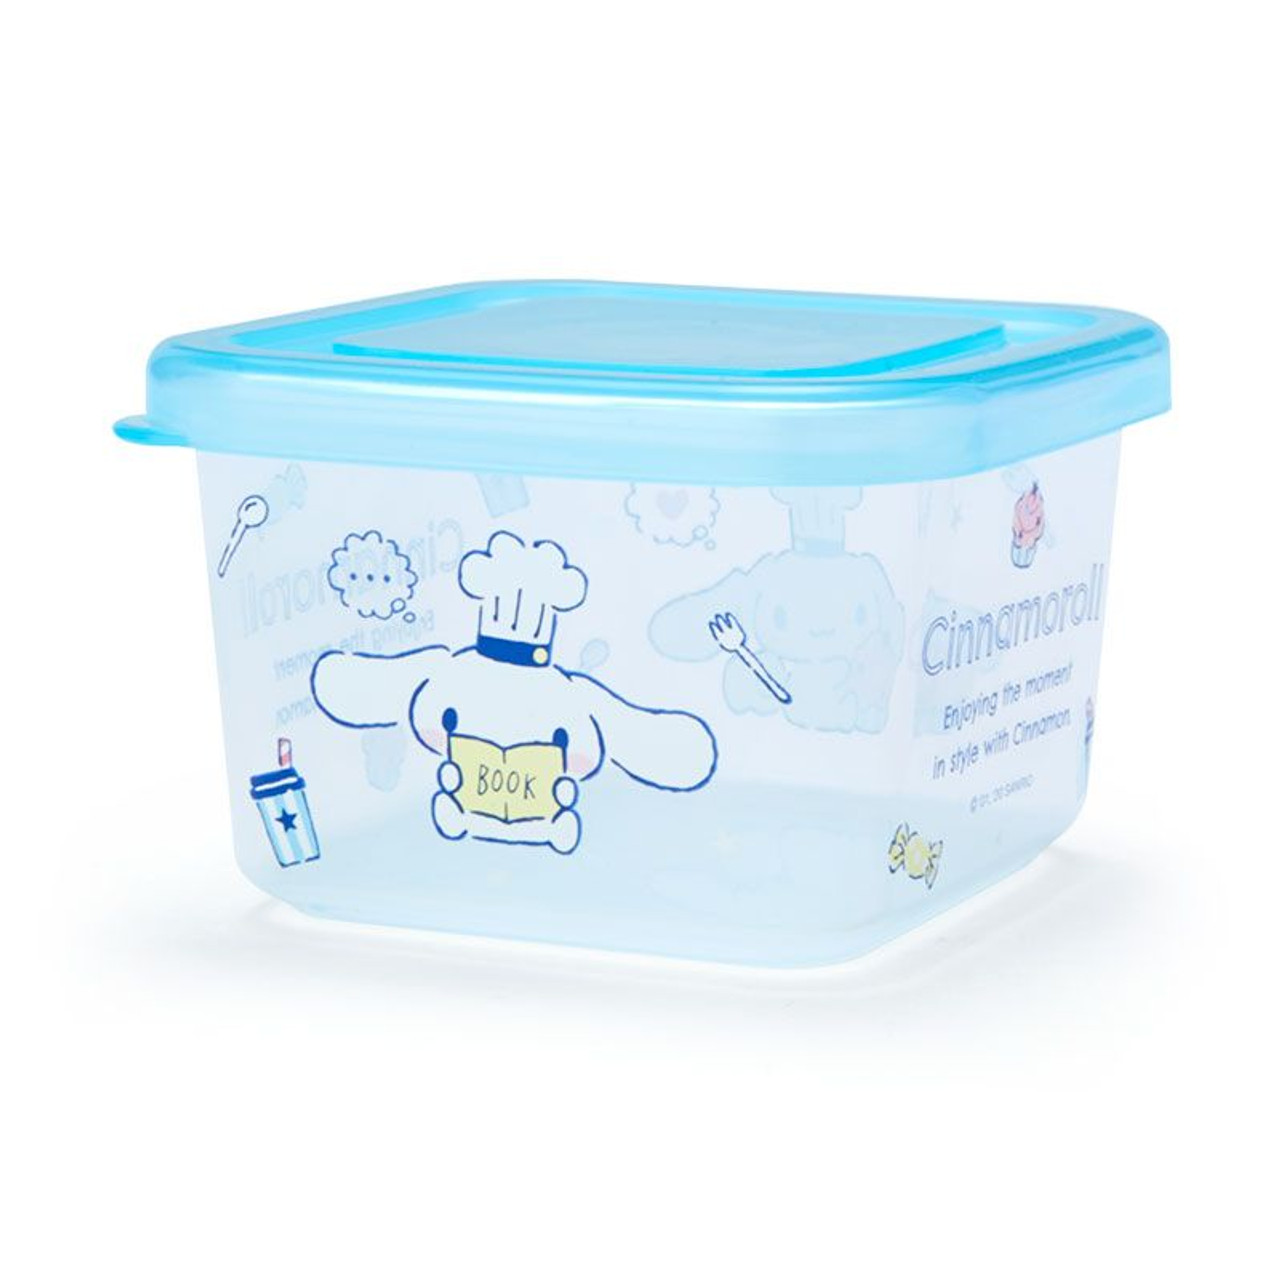 Pack Your Lunch with Cinnamoroll